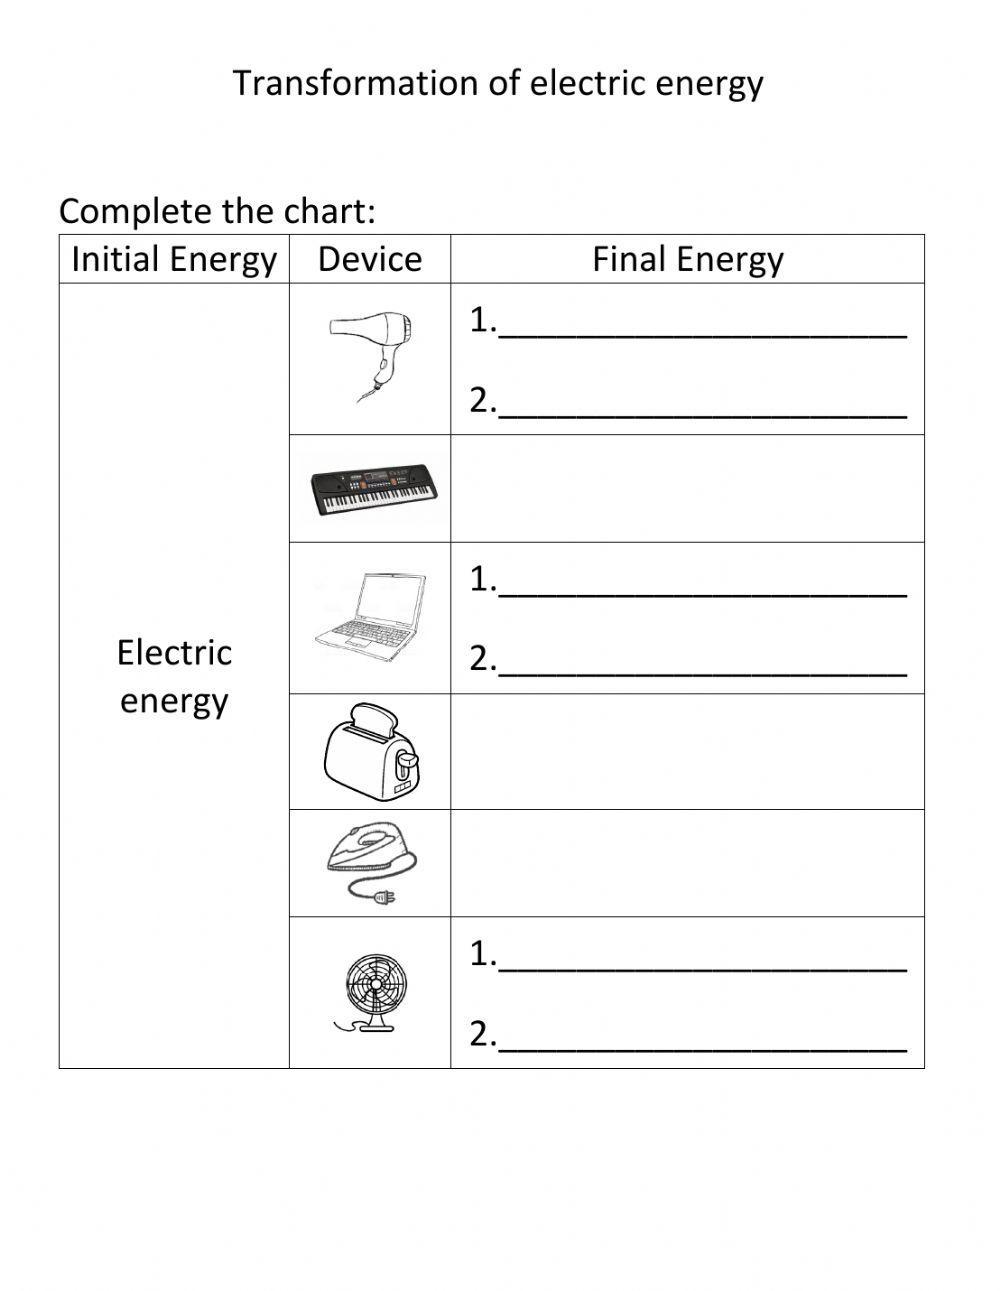 Transformation of electric energy